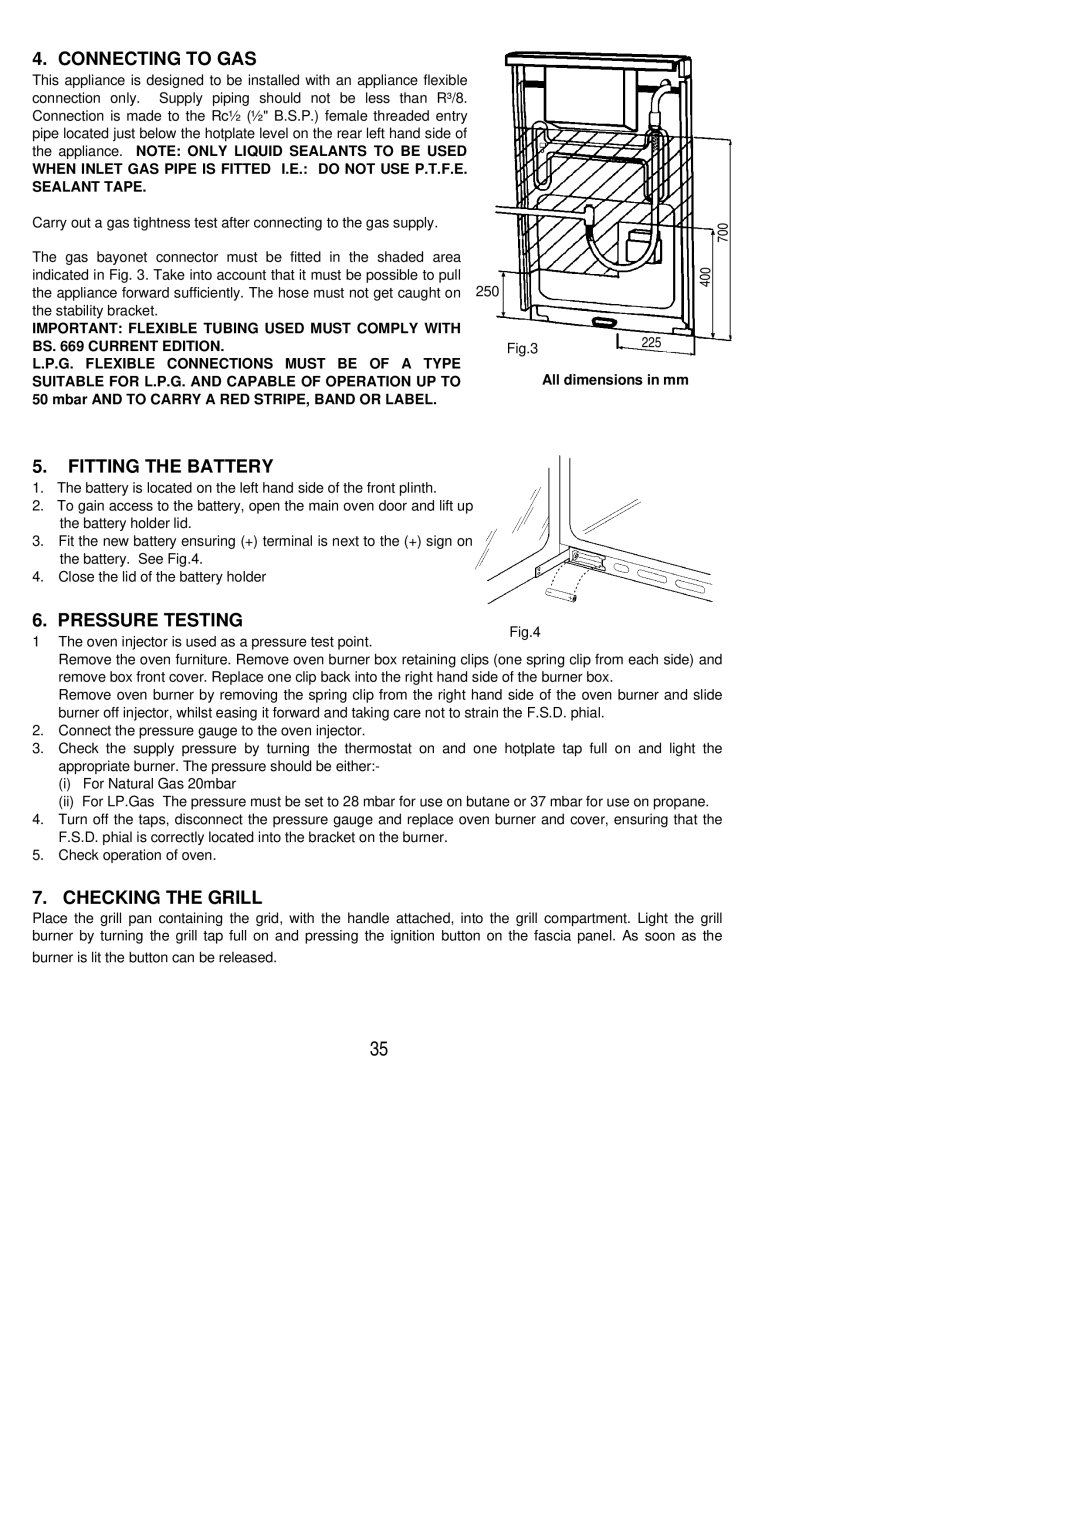 Electrolux SG305 installation instructions Connecting to GAS, Fitting the Battery, Pressure Testing, Checking the Grill 